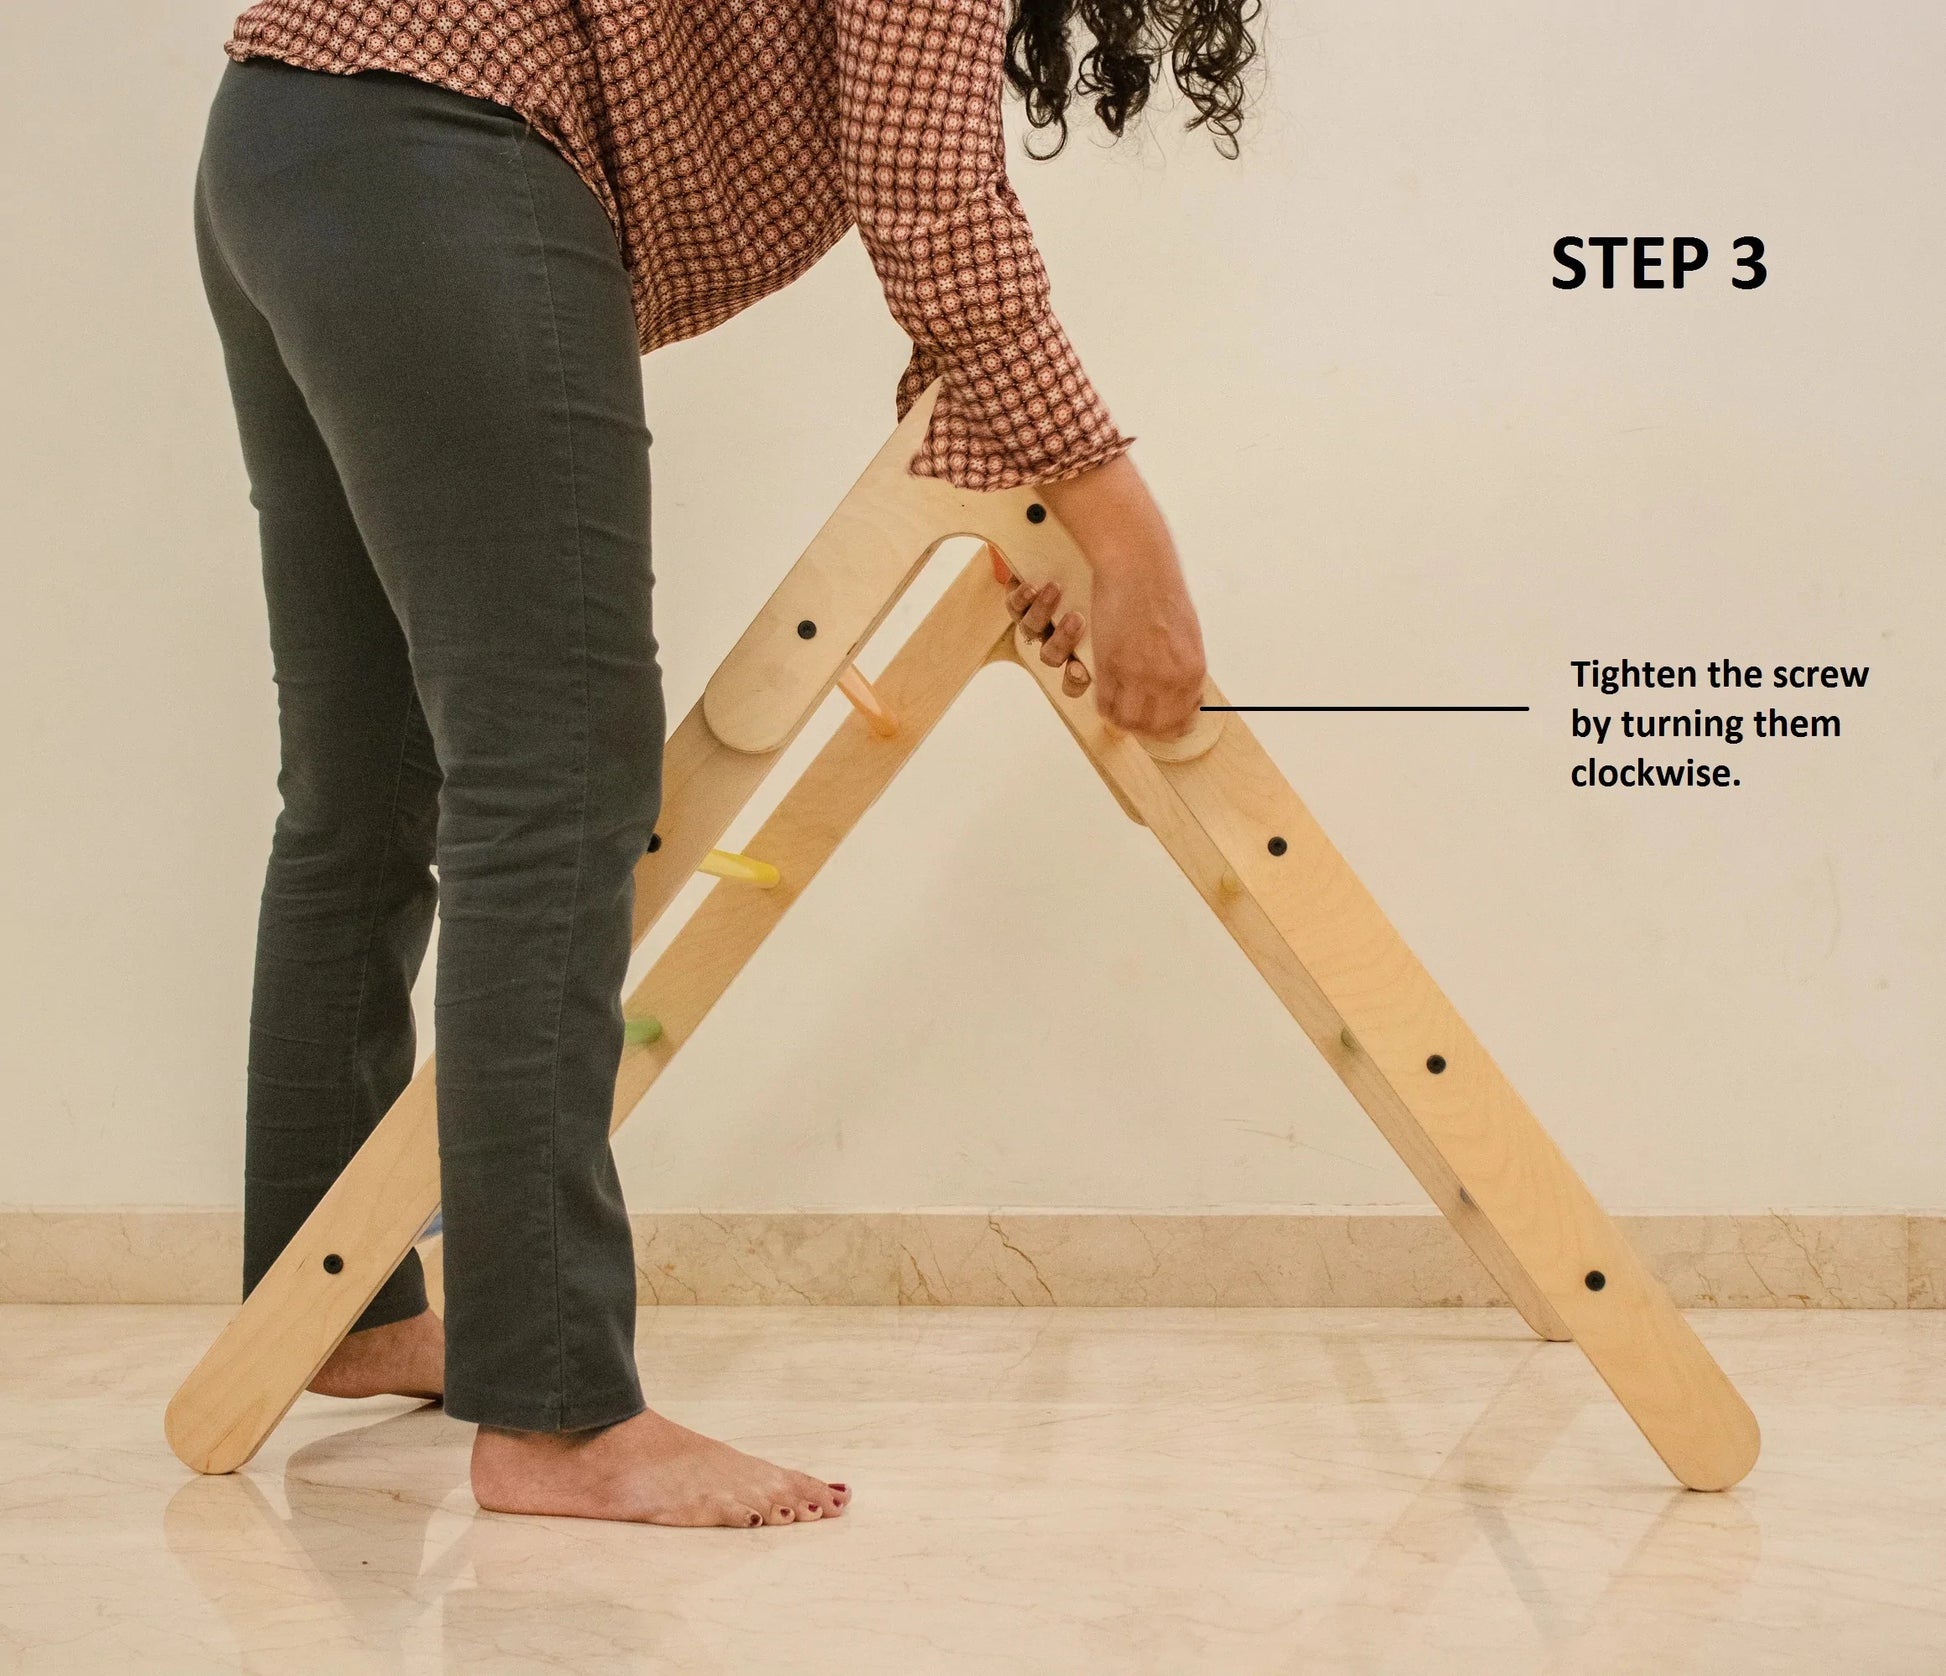 Buy The Wooden Climbing Pikler Triangle - Step 2 - SkilloToys.com